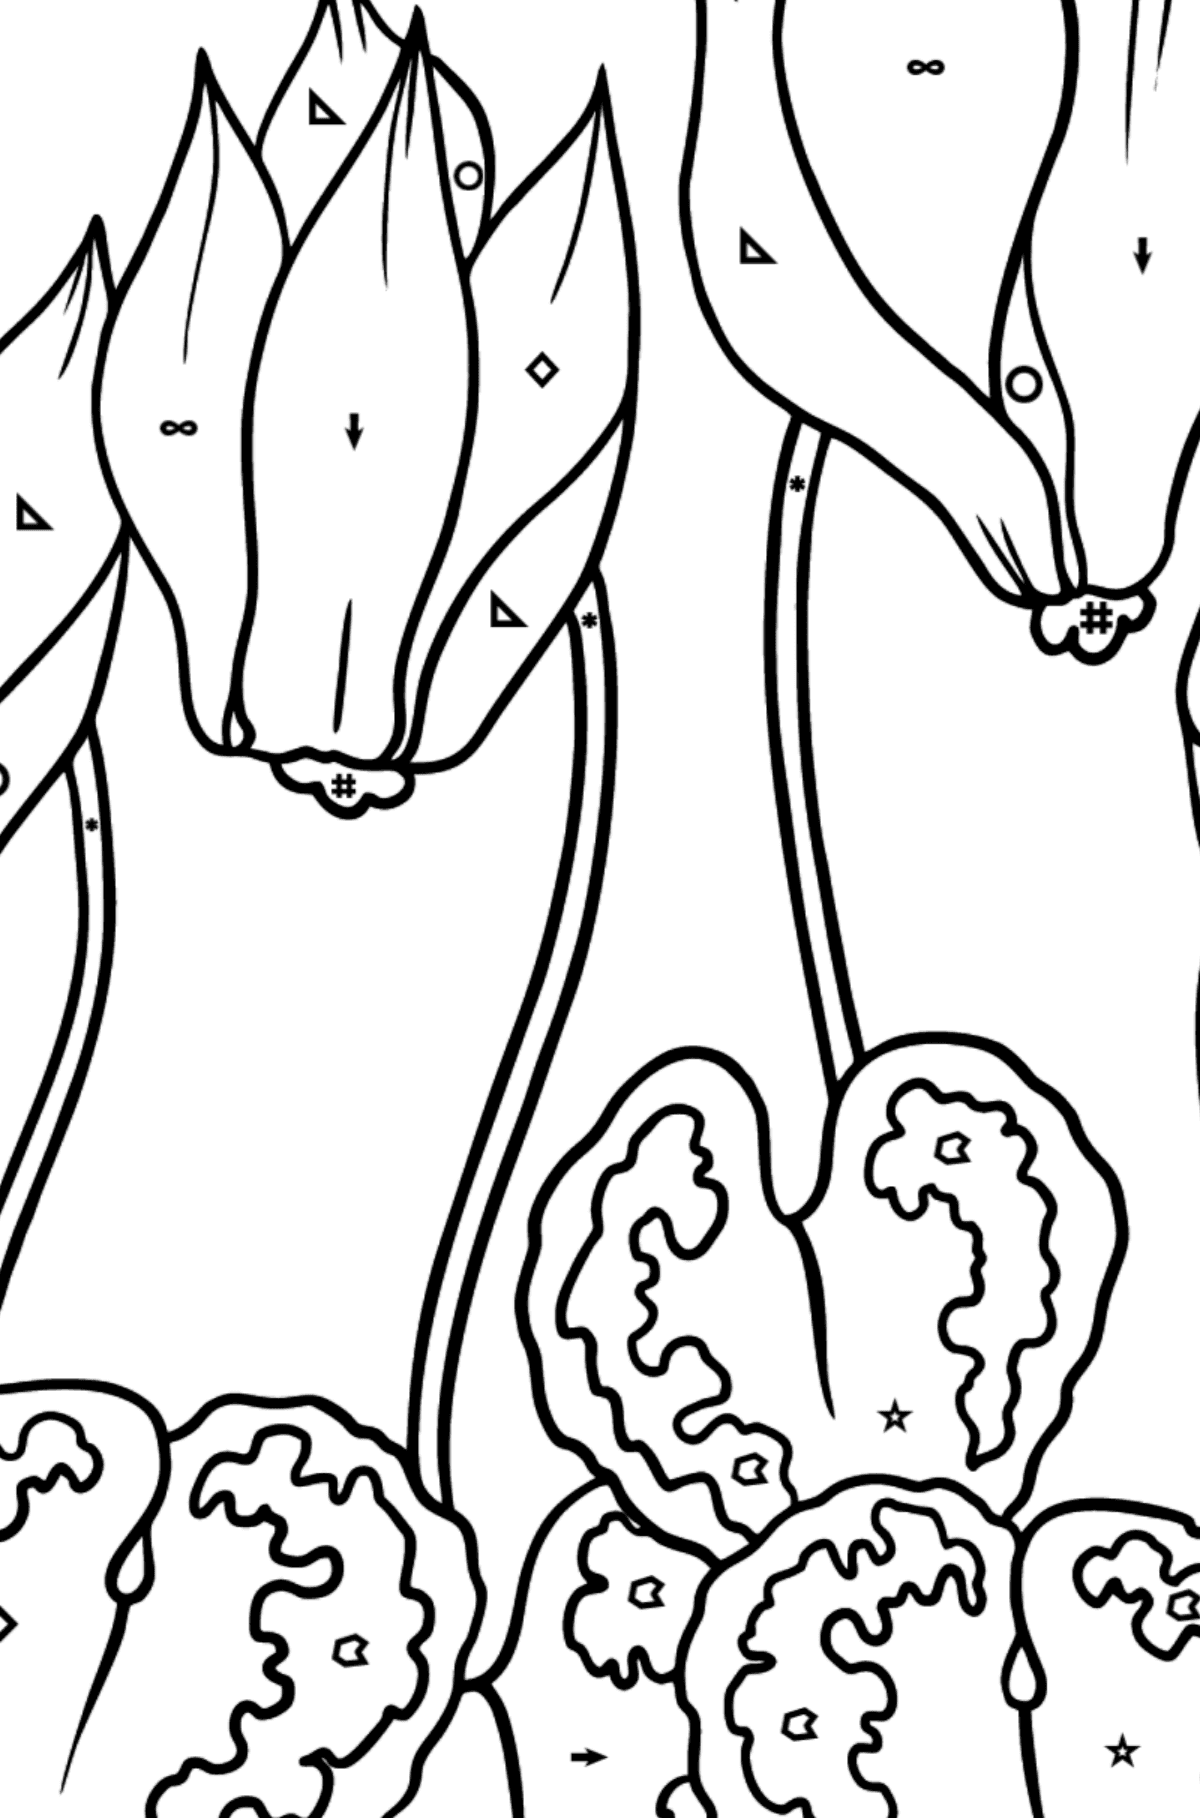 Red Cyclamen Coloring Page - Coloring by Symbols and Geometric Shapes for Kids